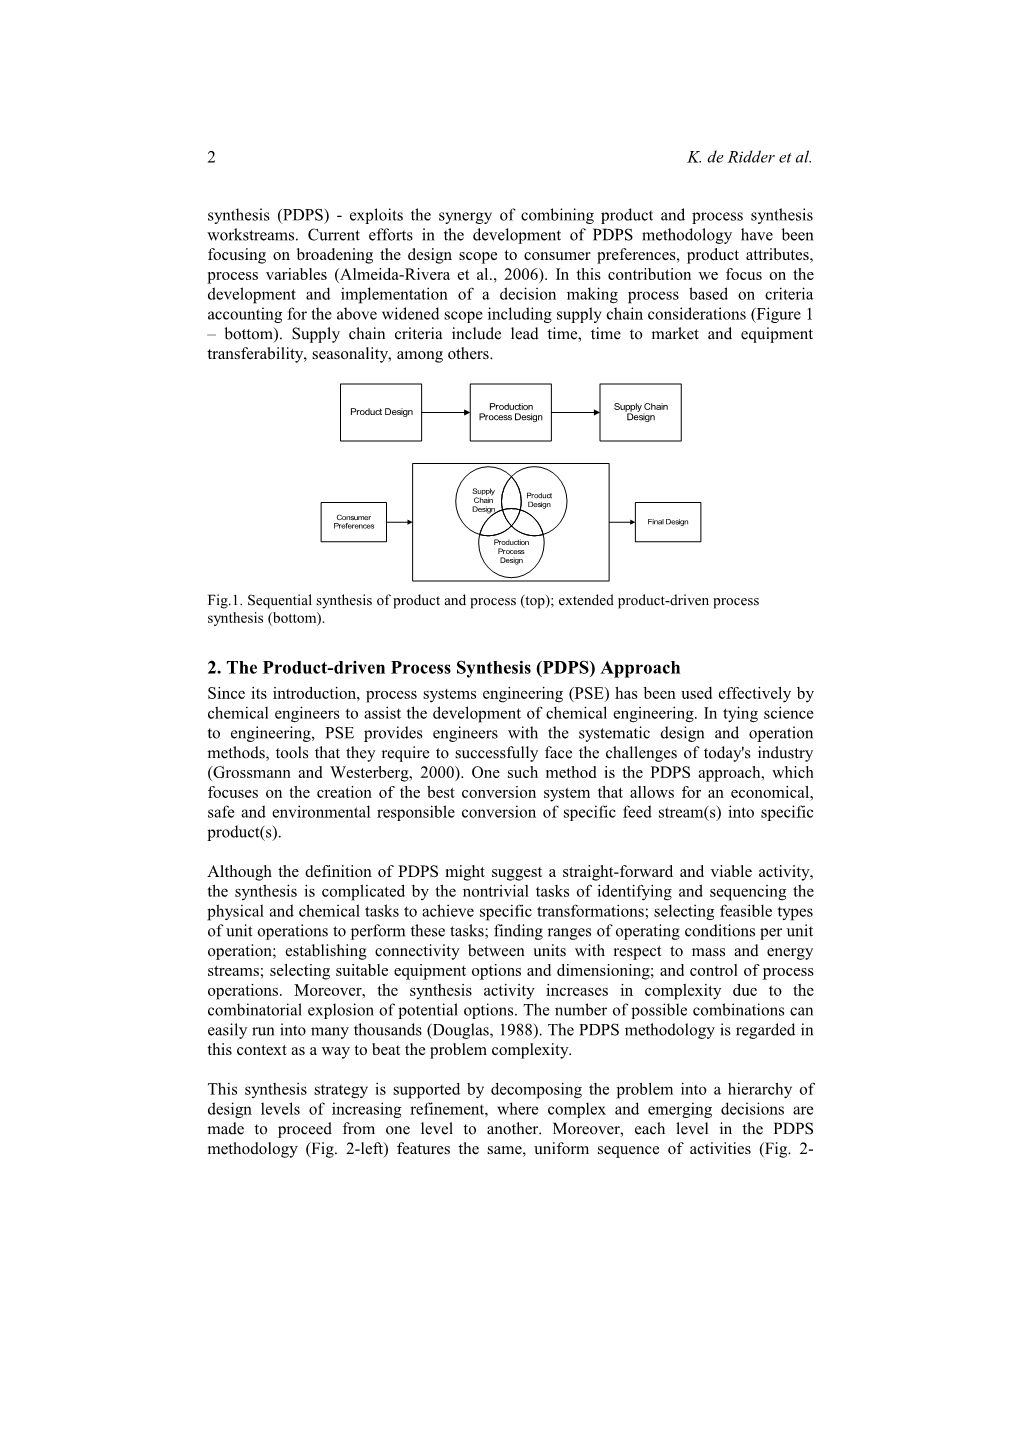 Multi-Criteria Decision Making in Product-Driven Process Synthesis